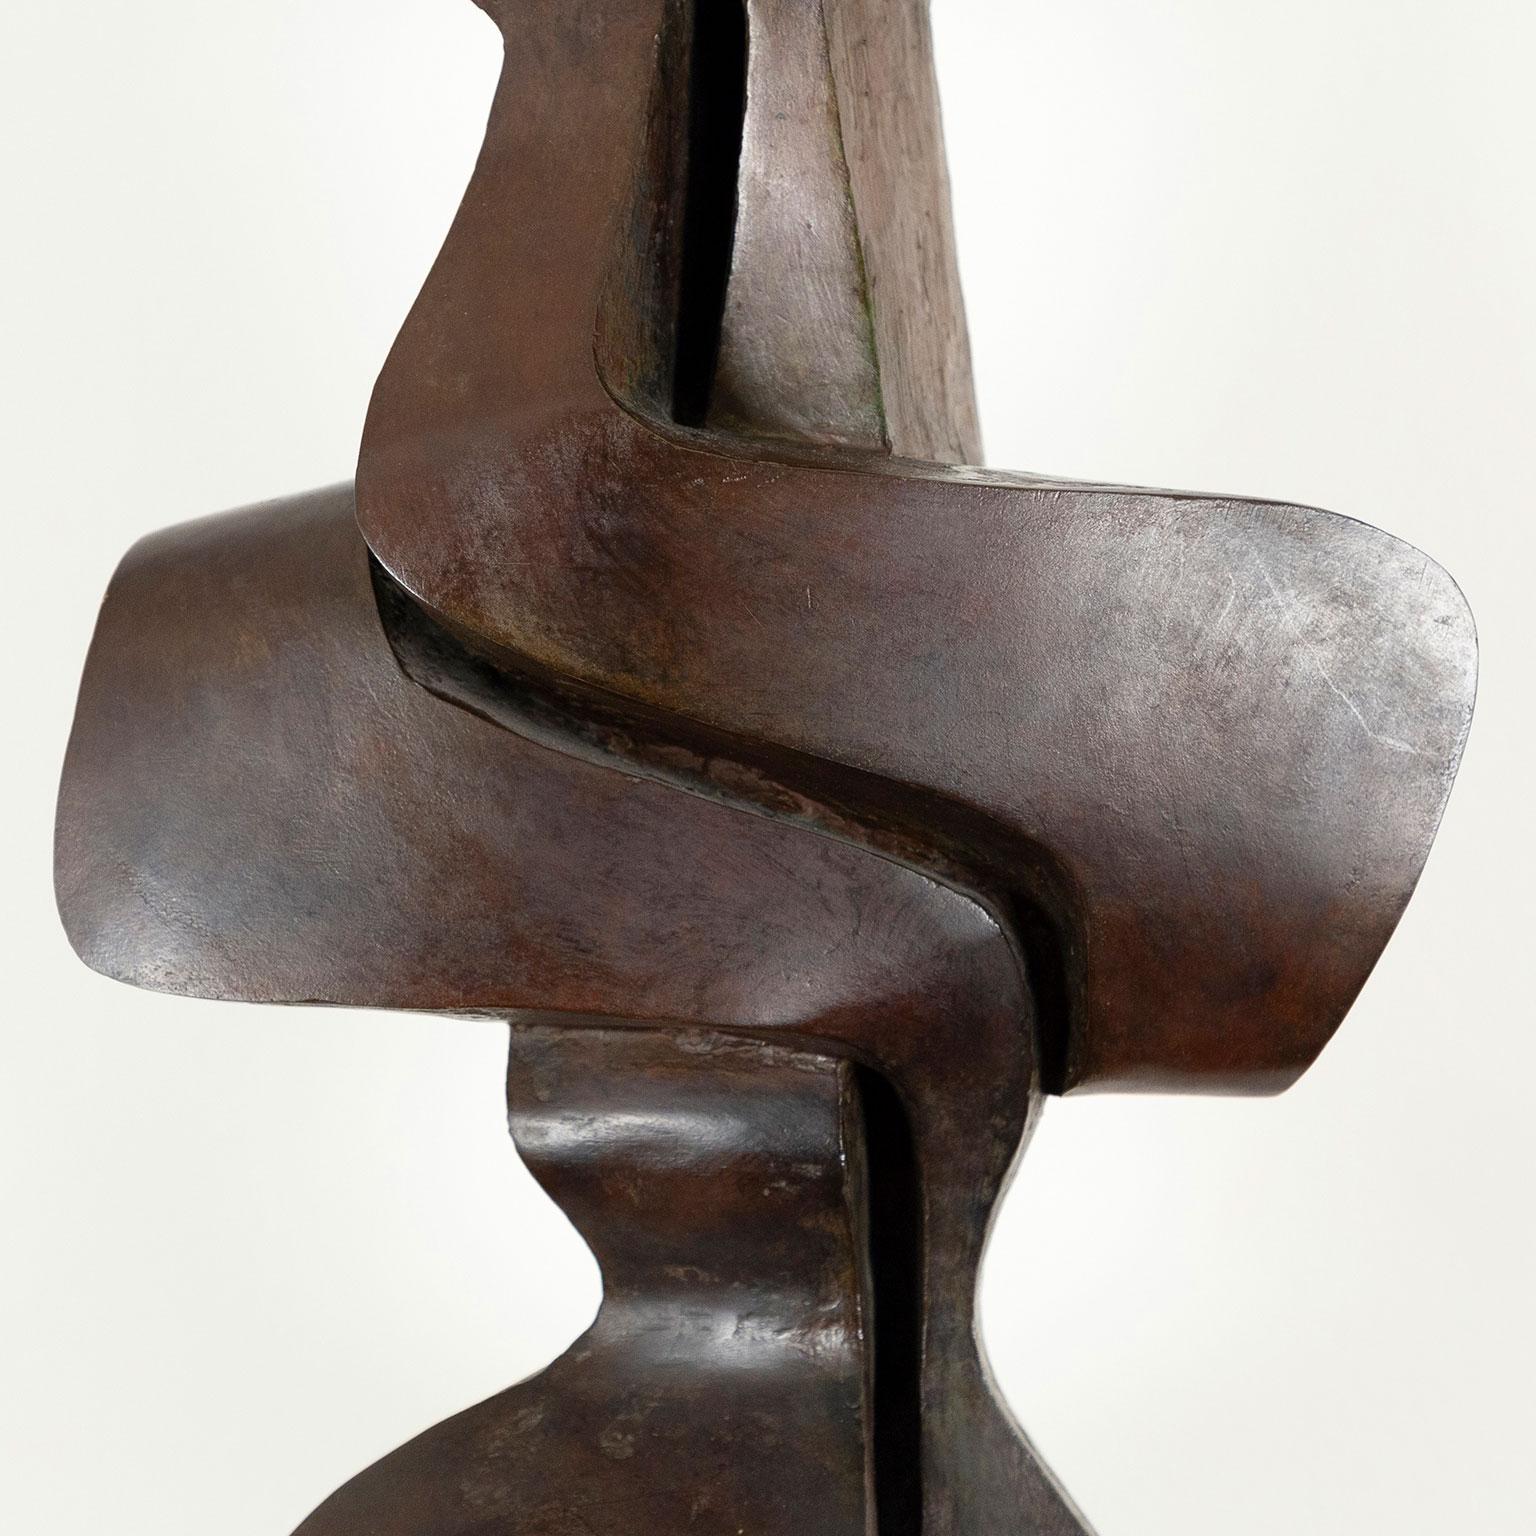 Sorel Etrog (1933 - 2014) is arguably Canada's most famous sculptor. 

Etrog's work is defined by existential themes surrounding the human experience. Exploring paradoxical concepts such as the innate yearning for connection and the inevitability of